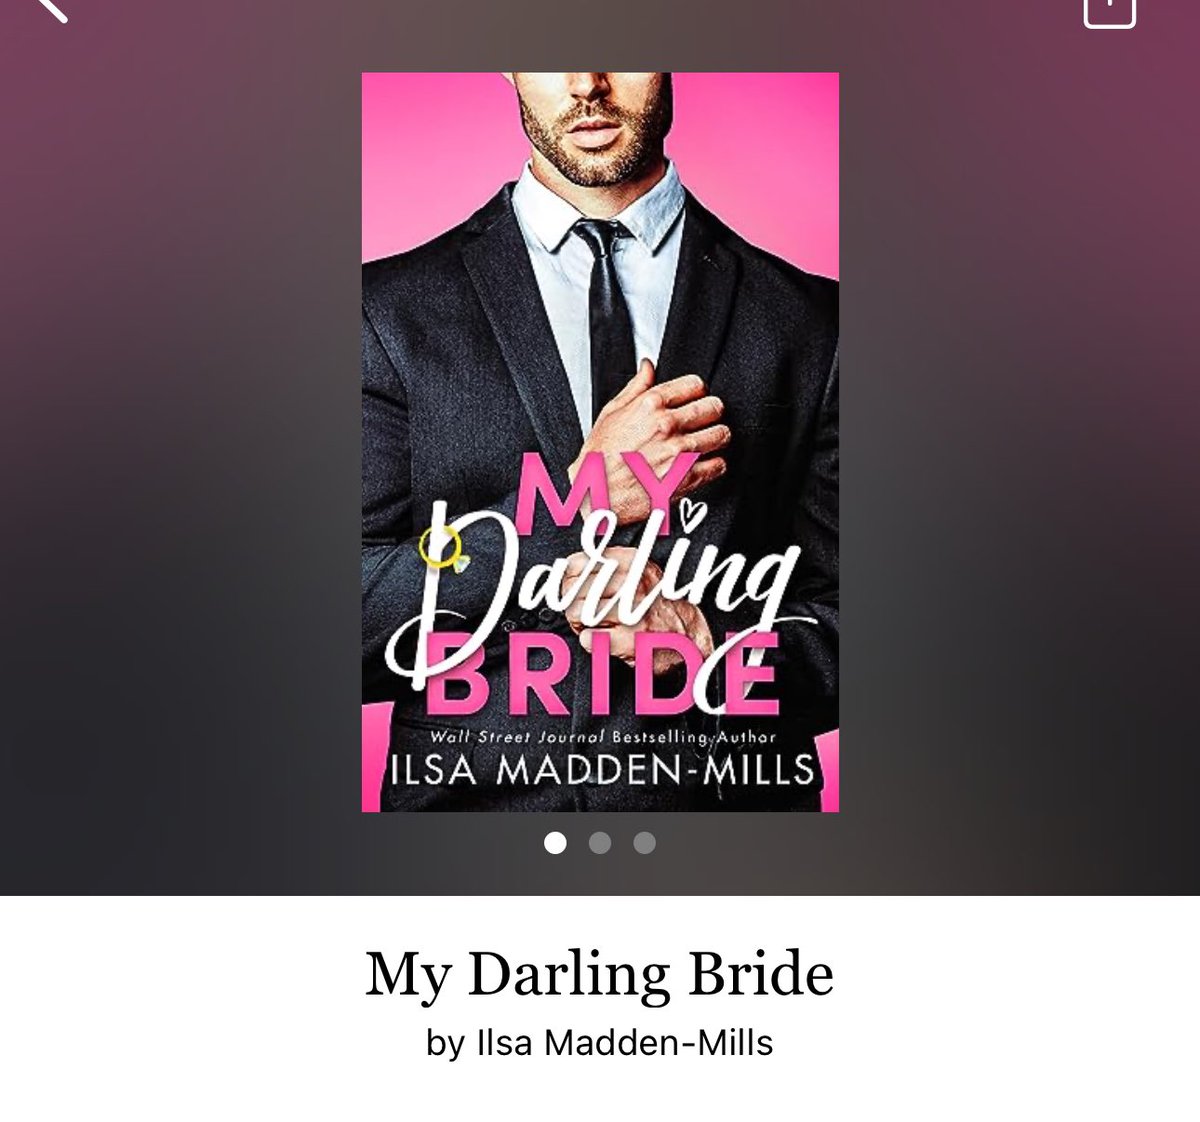 My Darling Bride by Isla Madden-Mills 

#MyDarlingBride by #IslaMaddenMills #5934 #34chapters #327pages #83of400 #83for21 #audiobook #kindleunlimited #NewRelease #9houraudiobook #EmmalineAndGraham #january2024 #clearingoffreadingshelves #whatsnext #readitquick